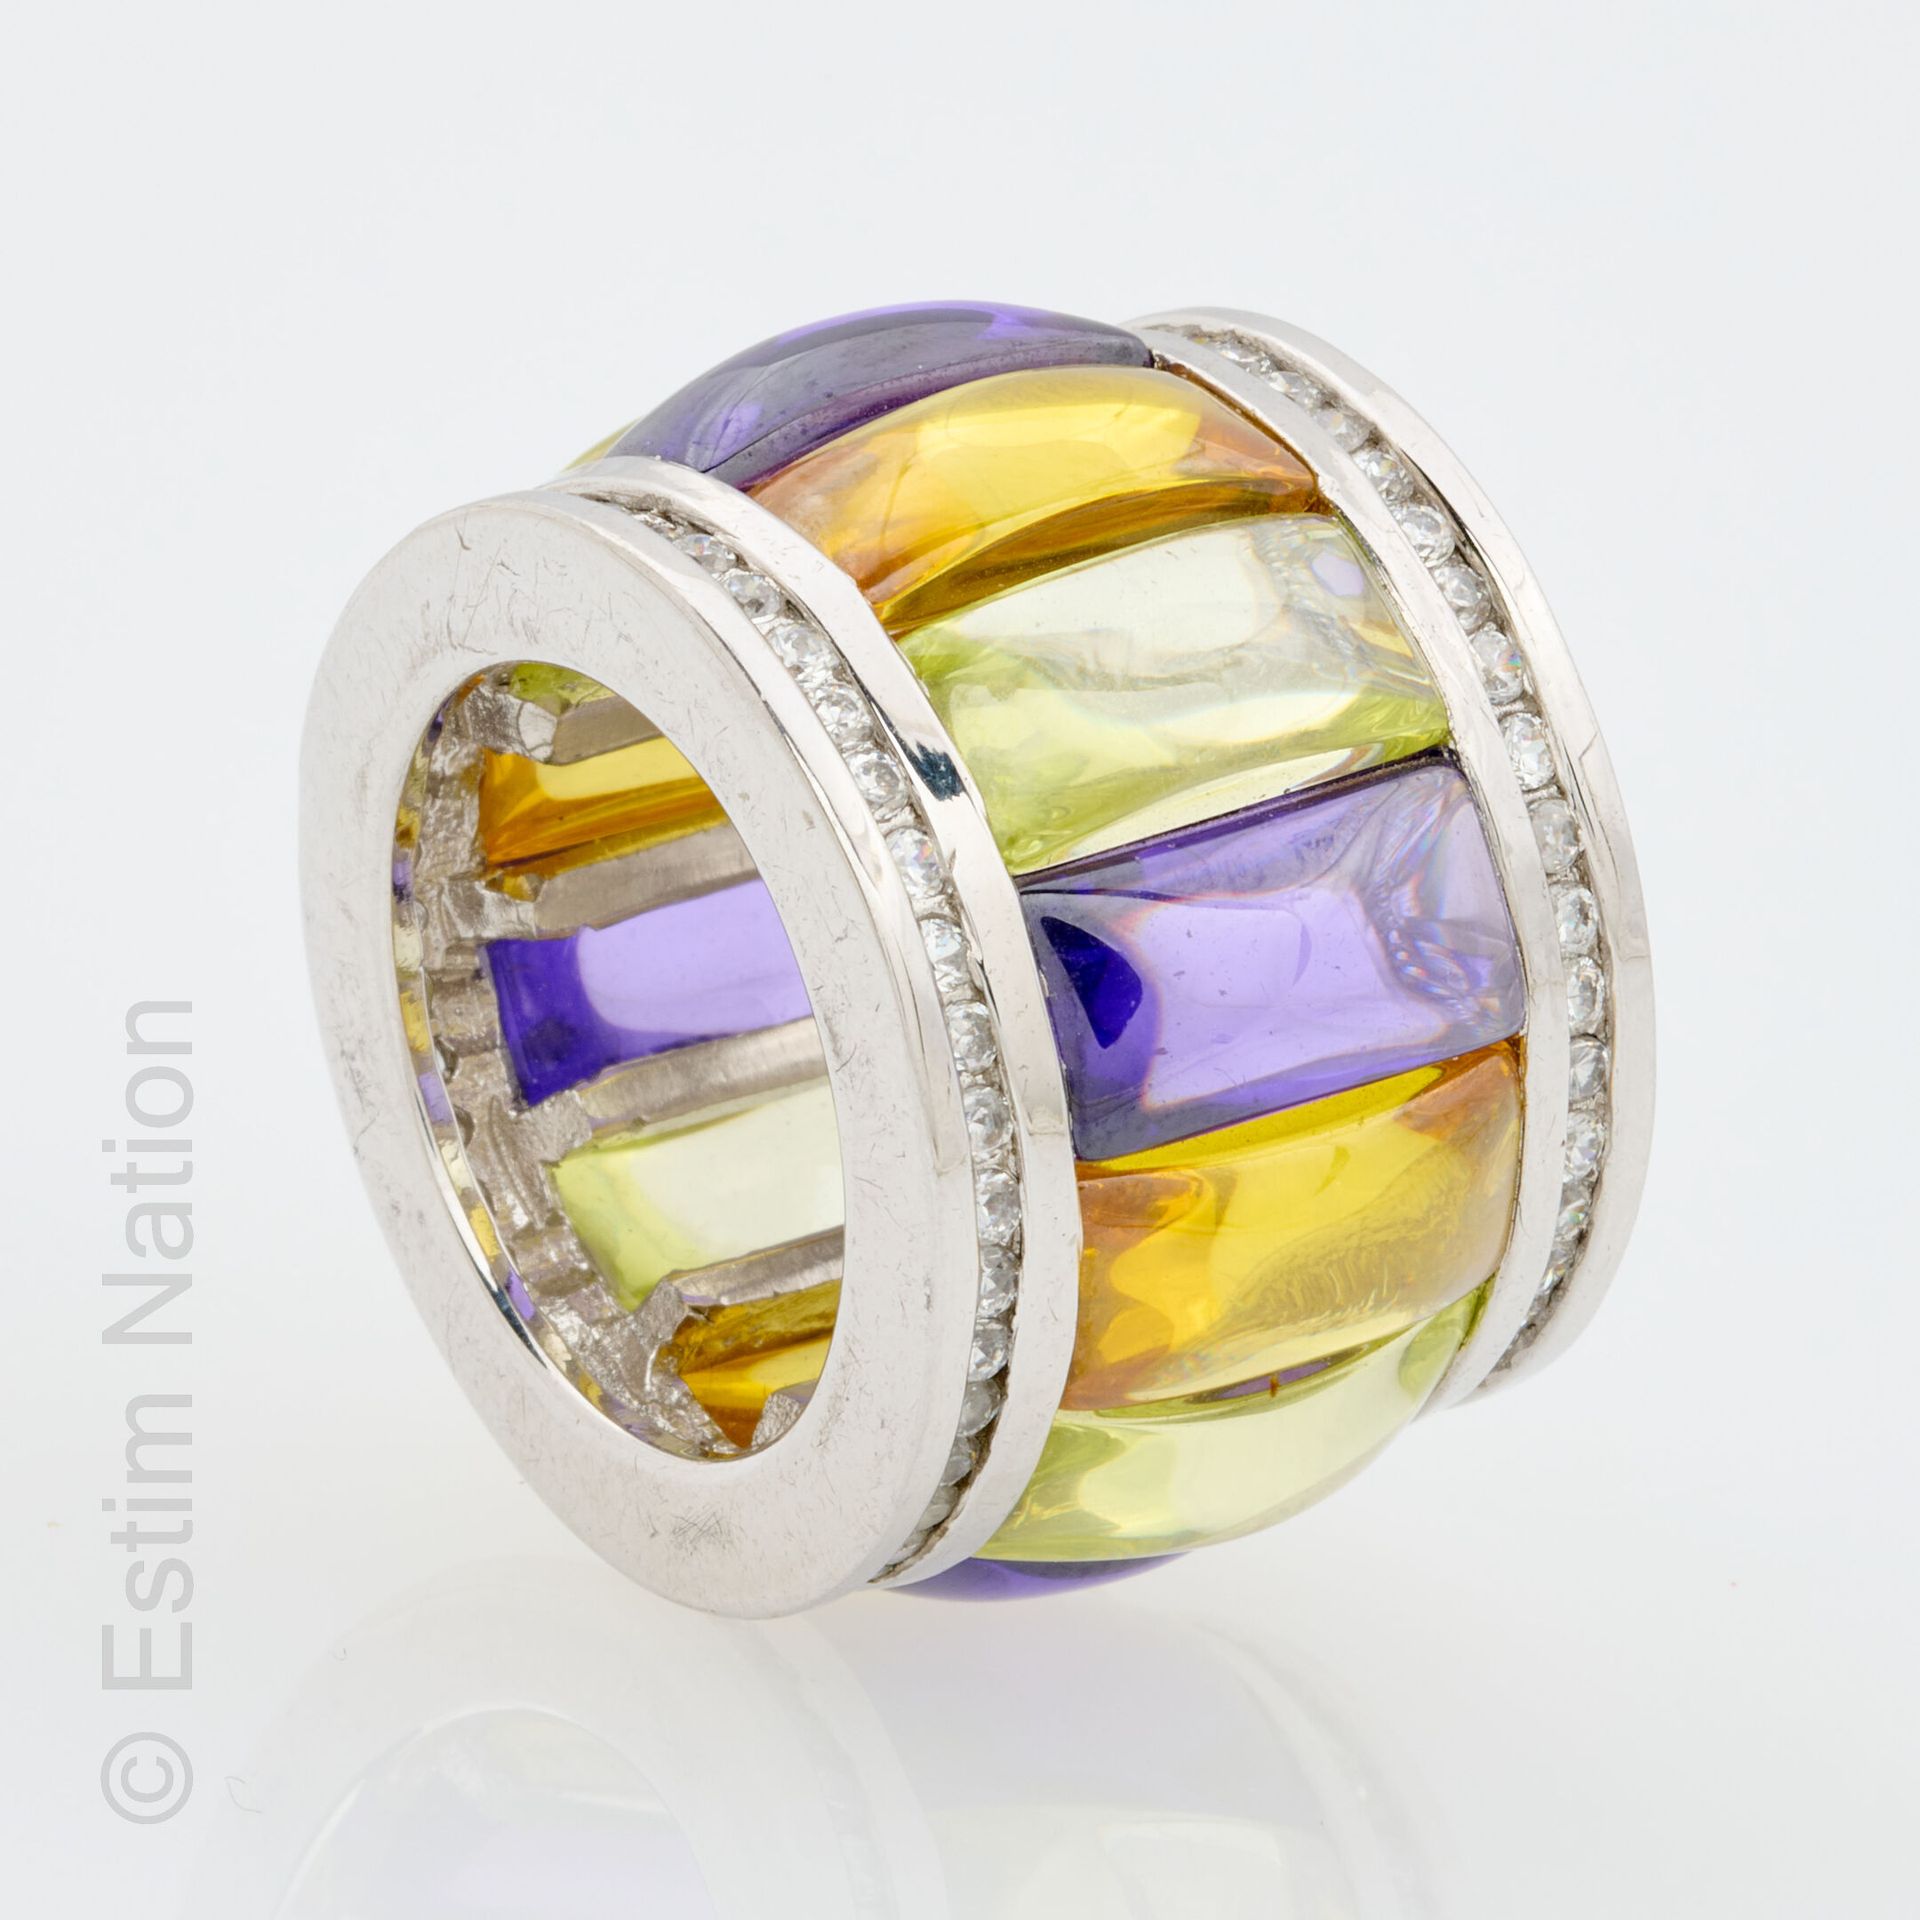 BAGUE ARGENT OXYDES Ring in silver 925/°° enhanced with colored oxides in caboch&hellip;